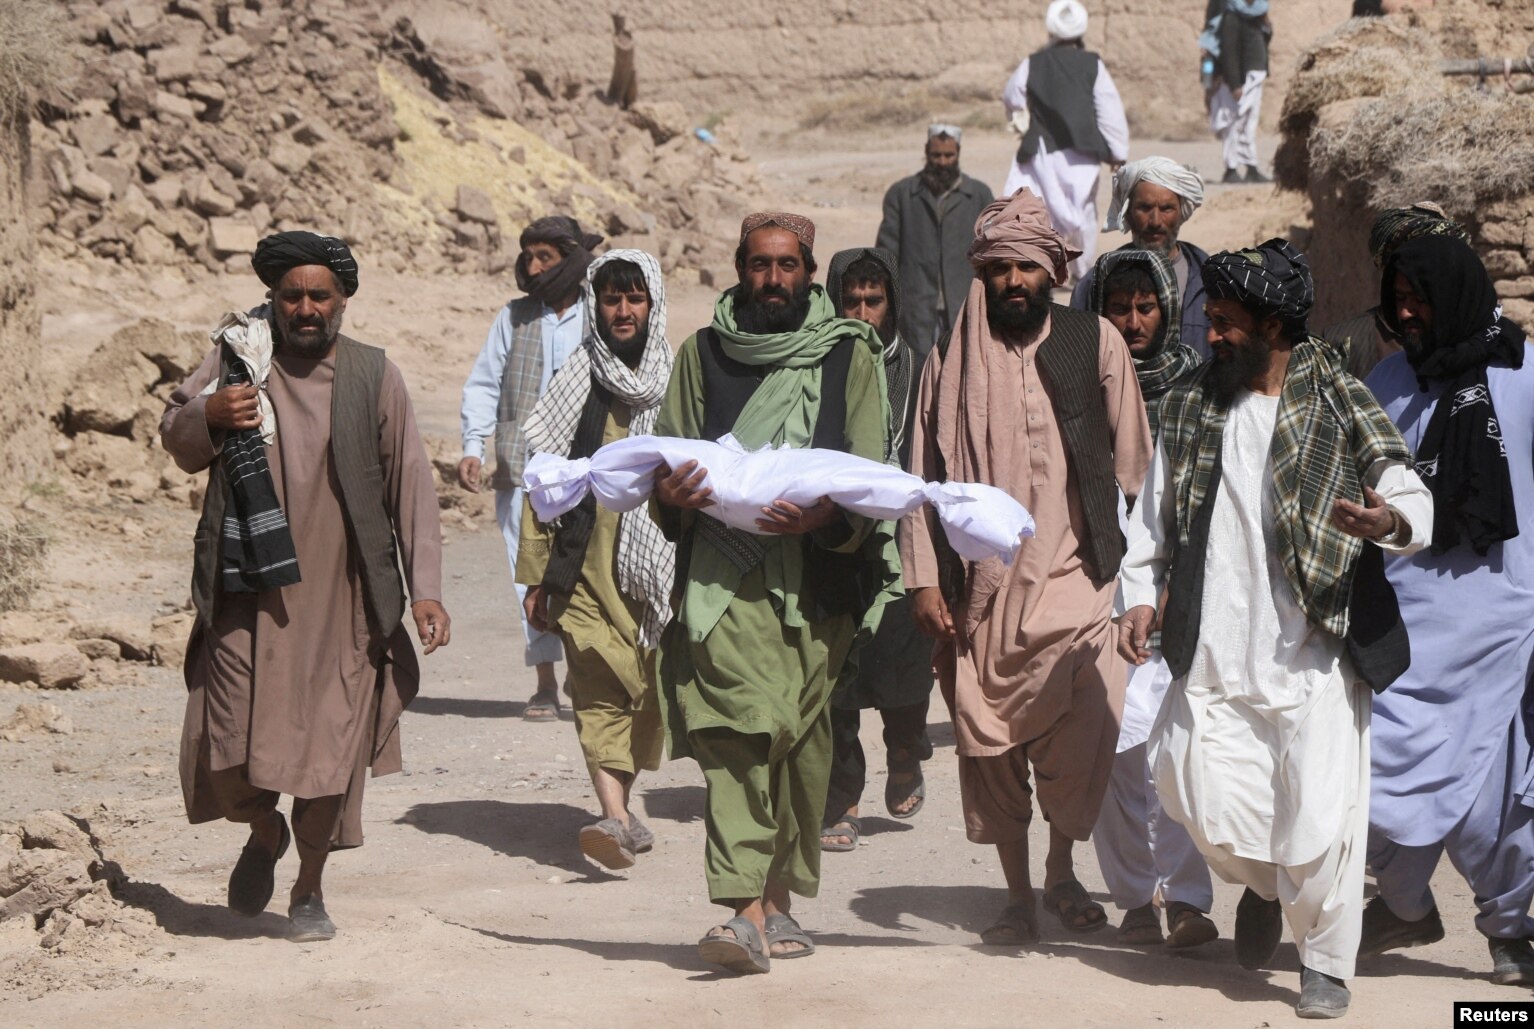 A man carries the lifeless body of his child, who was killed during an earthquake in the village of Sarbuland in Herat Province&#39;s Zindah Jan district on October 8. Aid workers have reached some quake-stricken areas of western Afghanistan and started distributing emergency food supplies to those affected as rescue efforts continued after a series of powerful temblors killed at least 2,000 people.